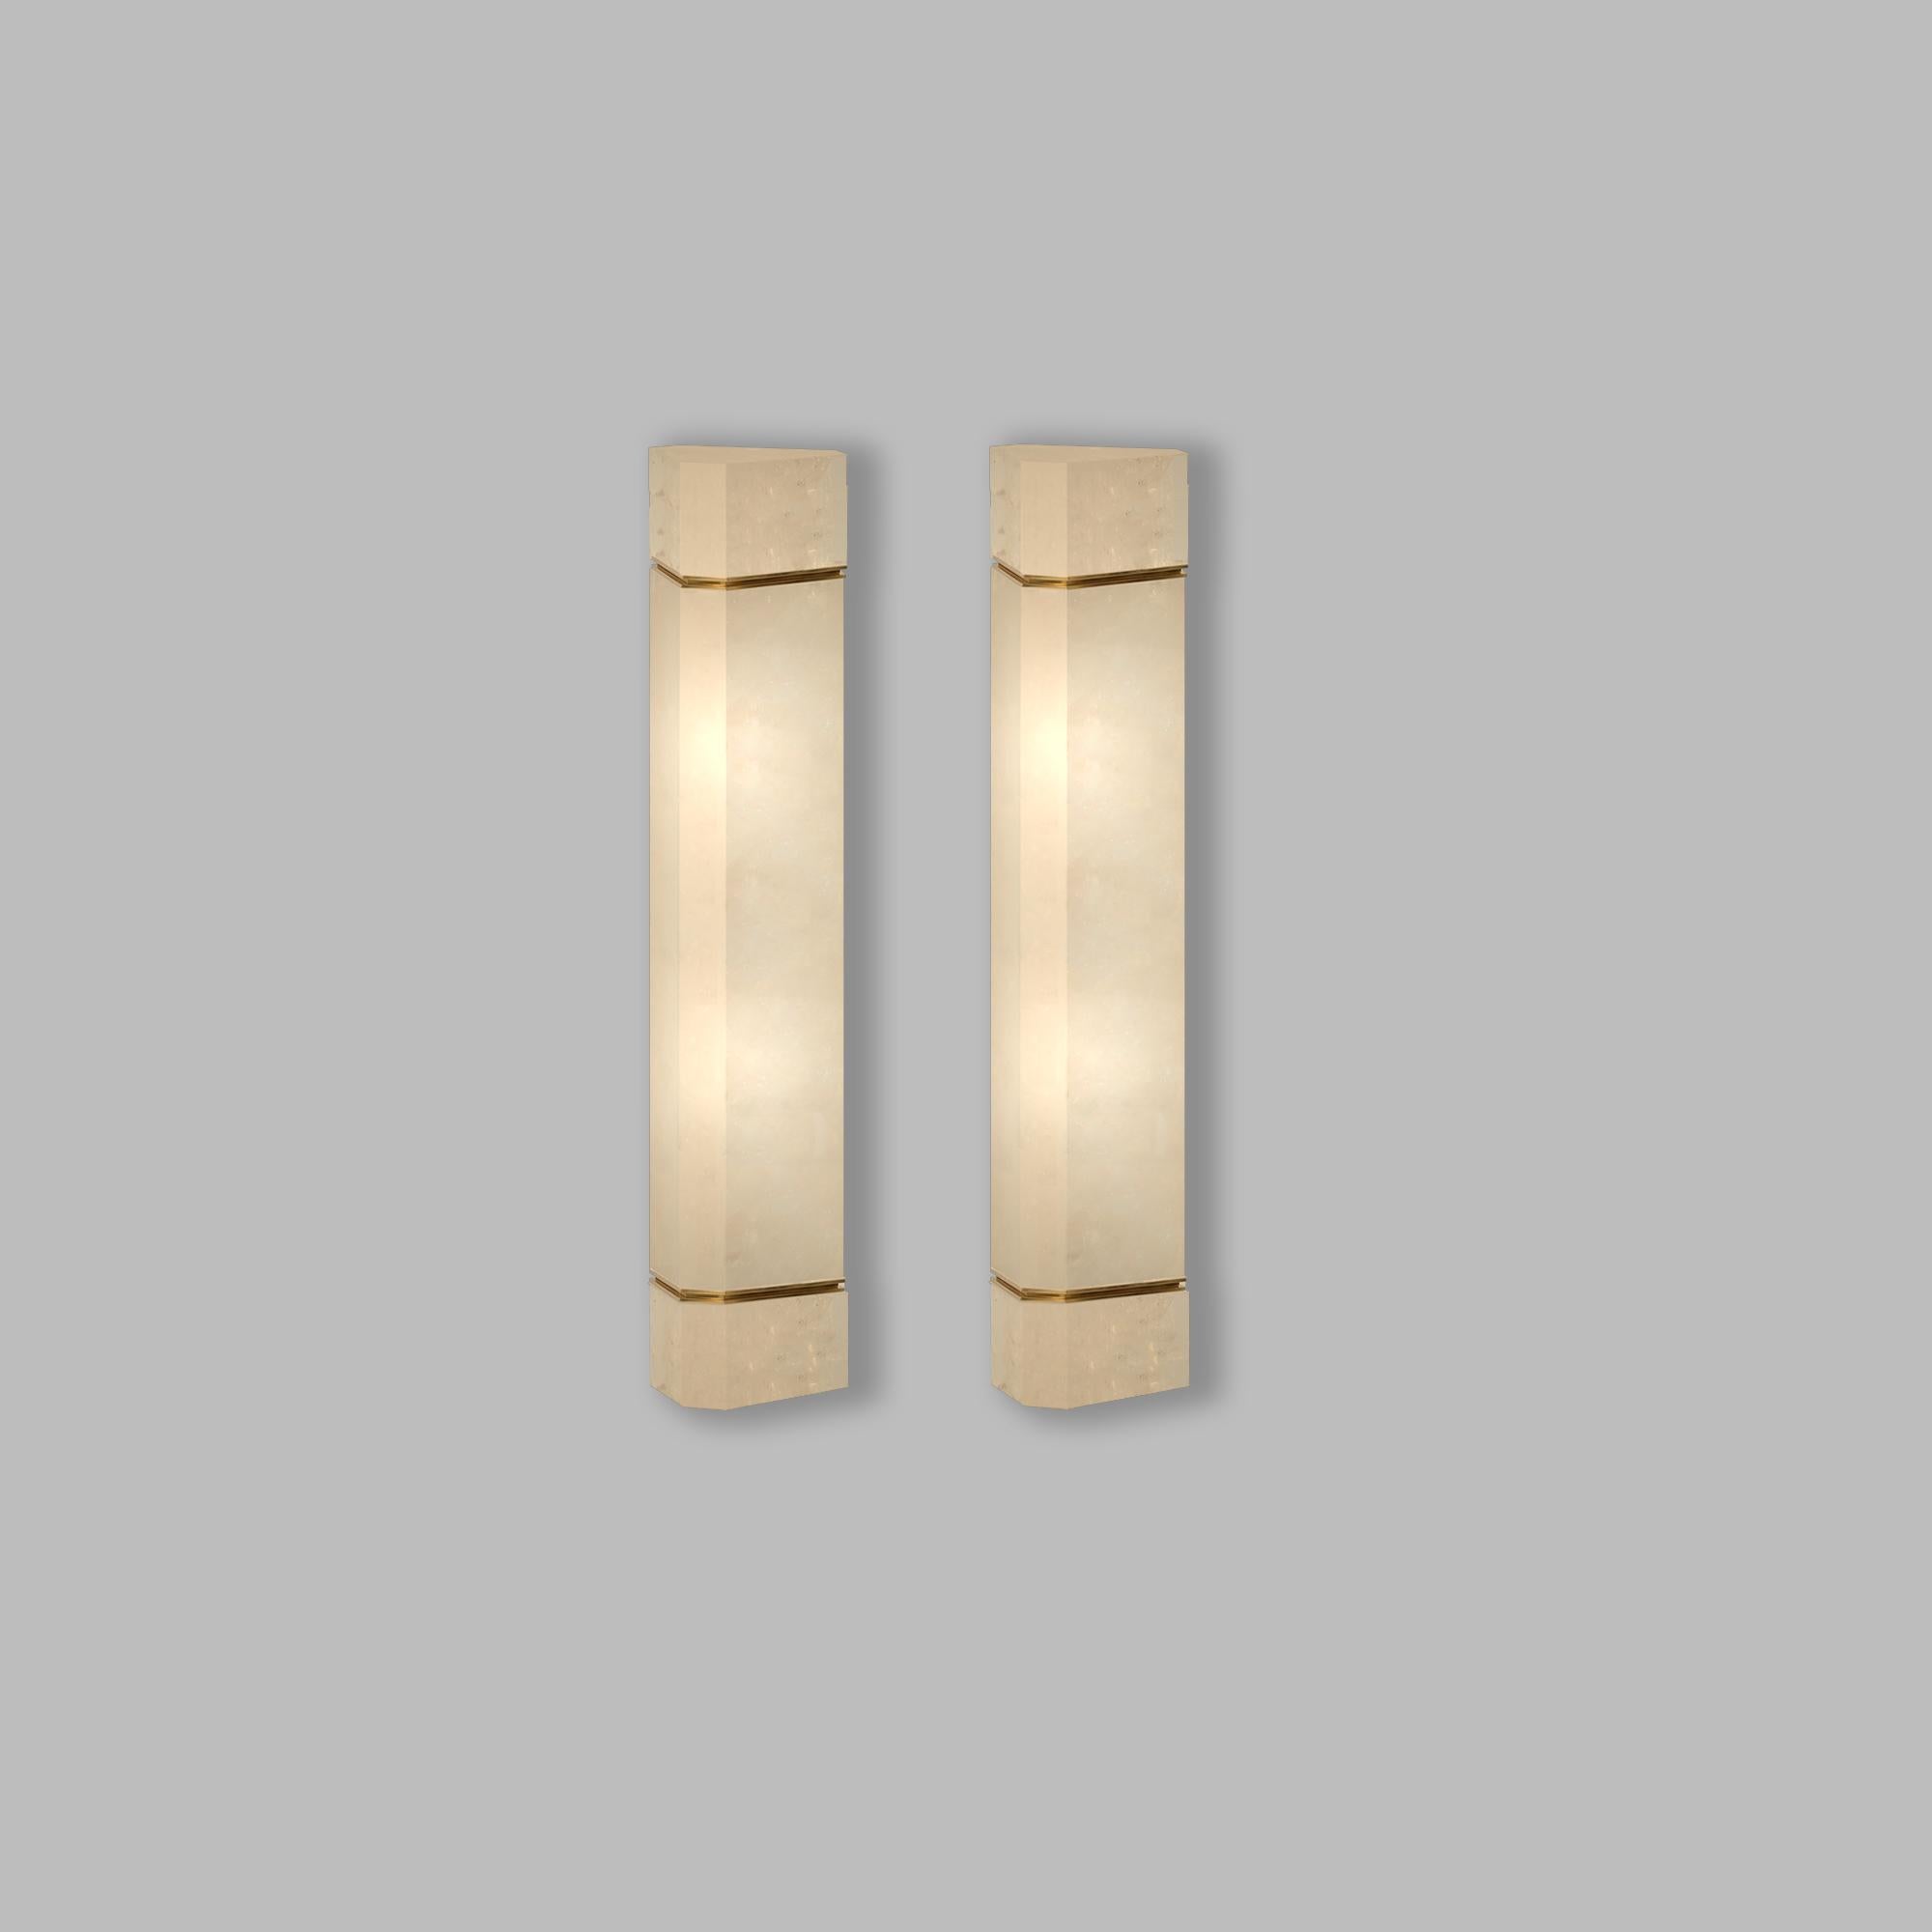 Pair of carved rock crystal sconces with polish brass inserts decorations, created
by Phoenix.
Custom size and finish upon request.